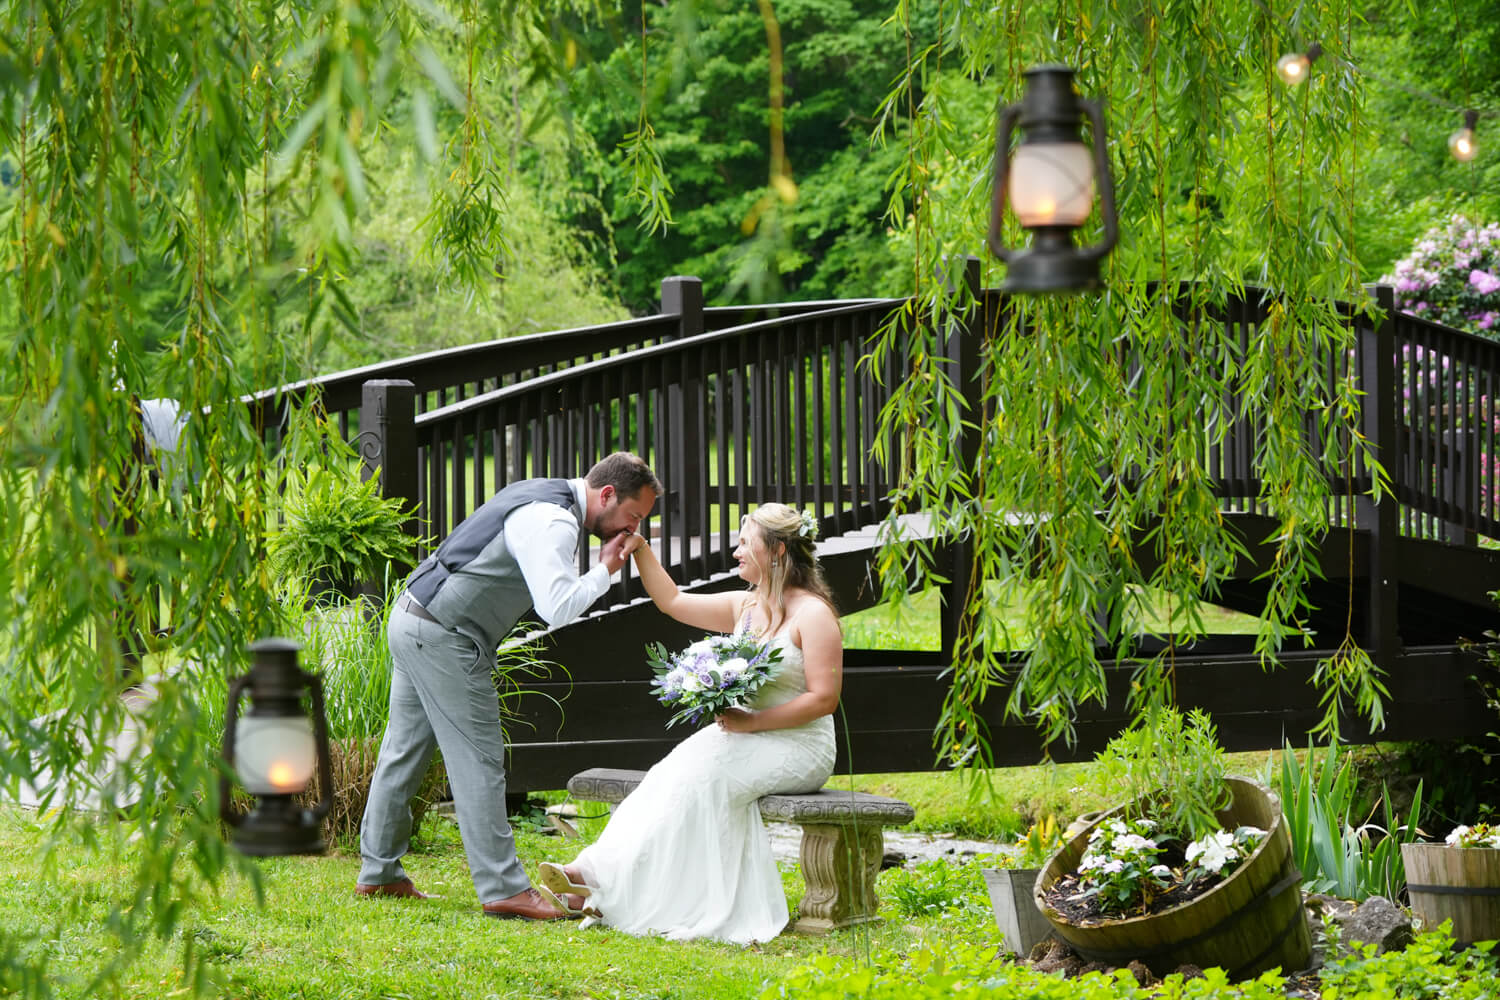 Groom kissing his bride's hand under a willow tree with hanging lanterns by the arched bridge at Honeysuckle Hills in Pigeon Forge